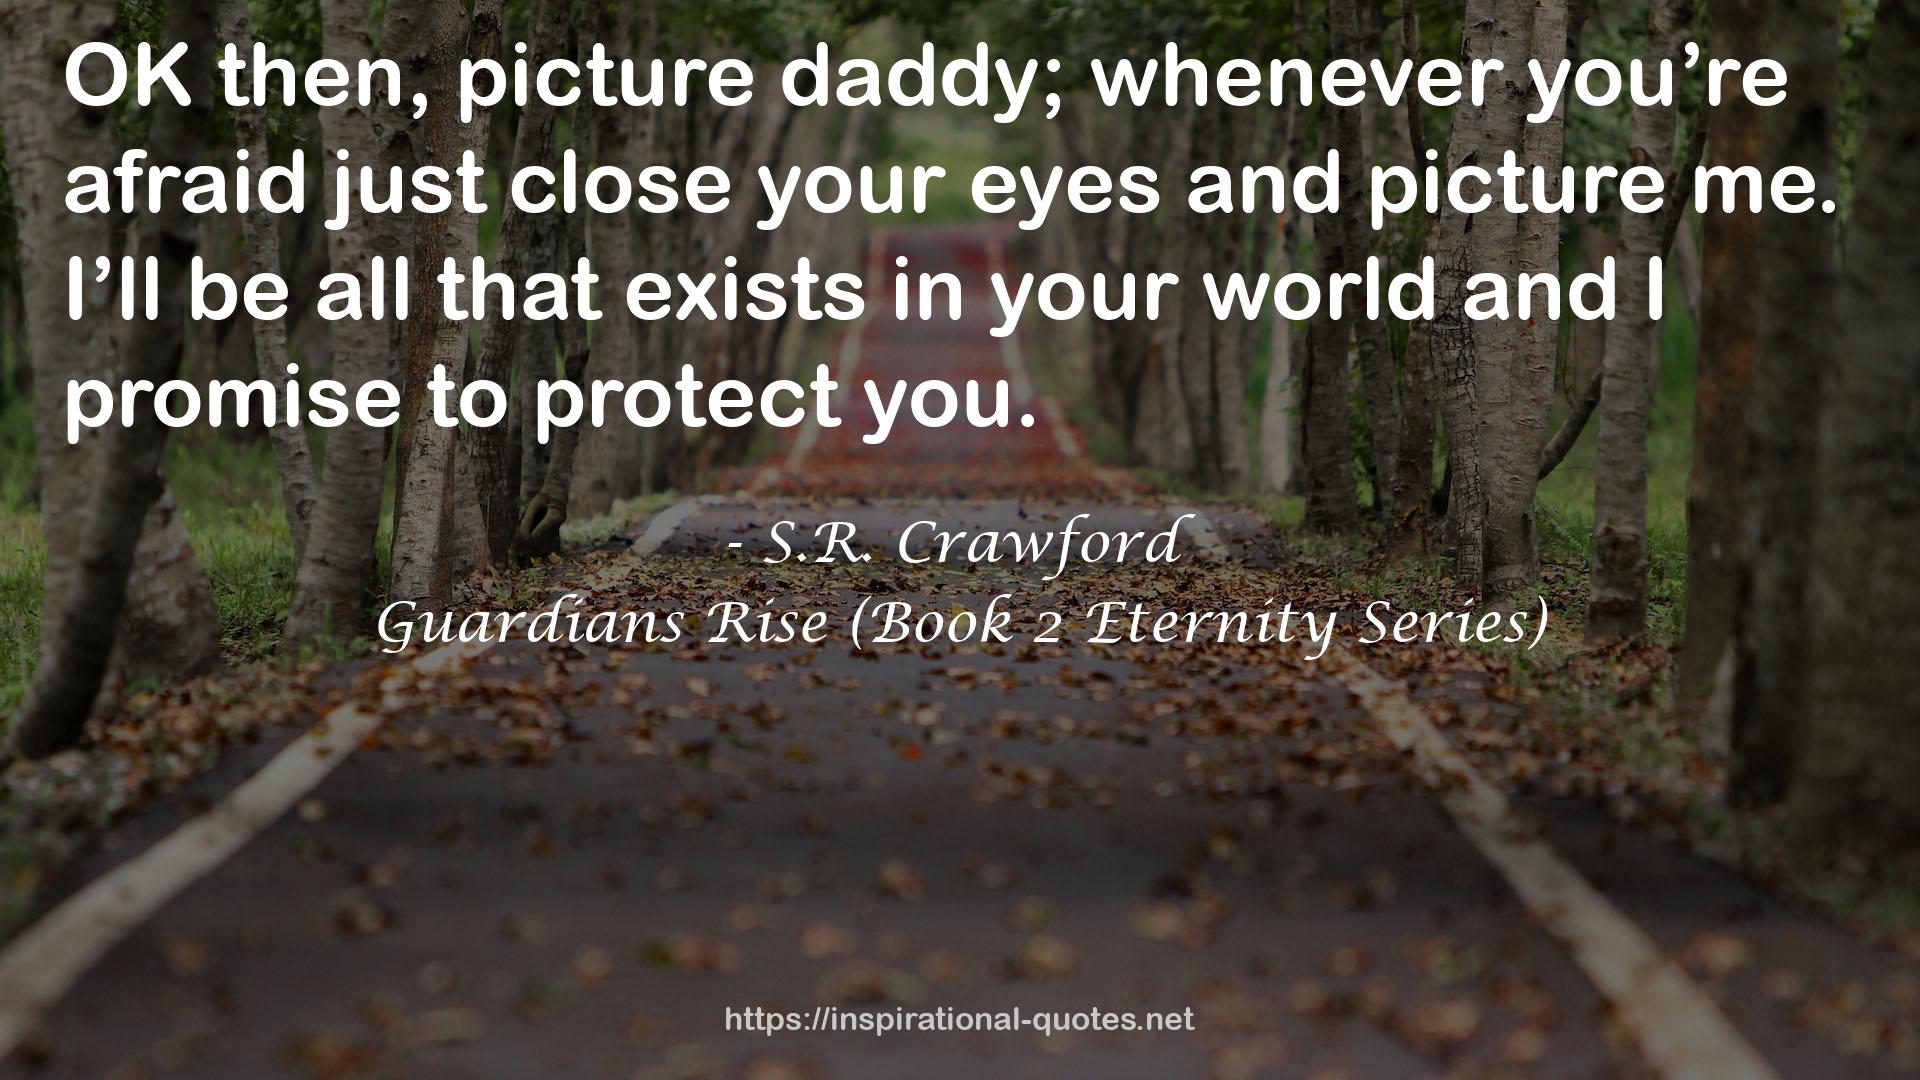 Guardians Rise (Book 2 Eternity Series) QUOTES